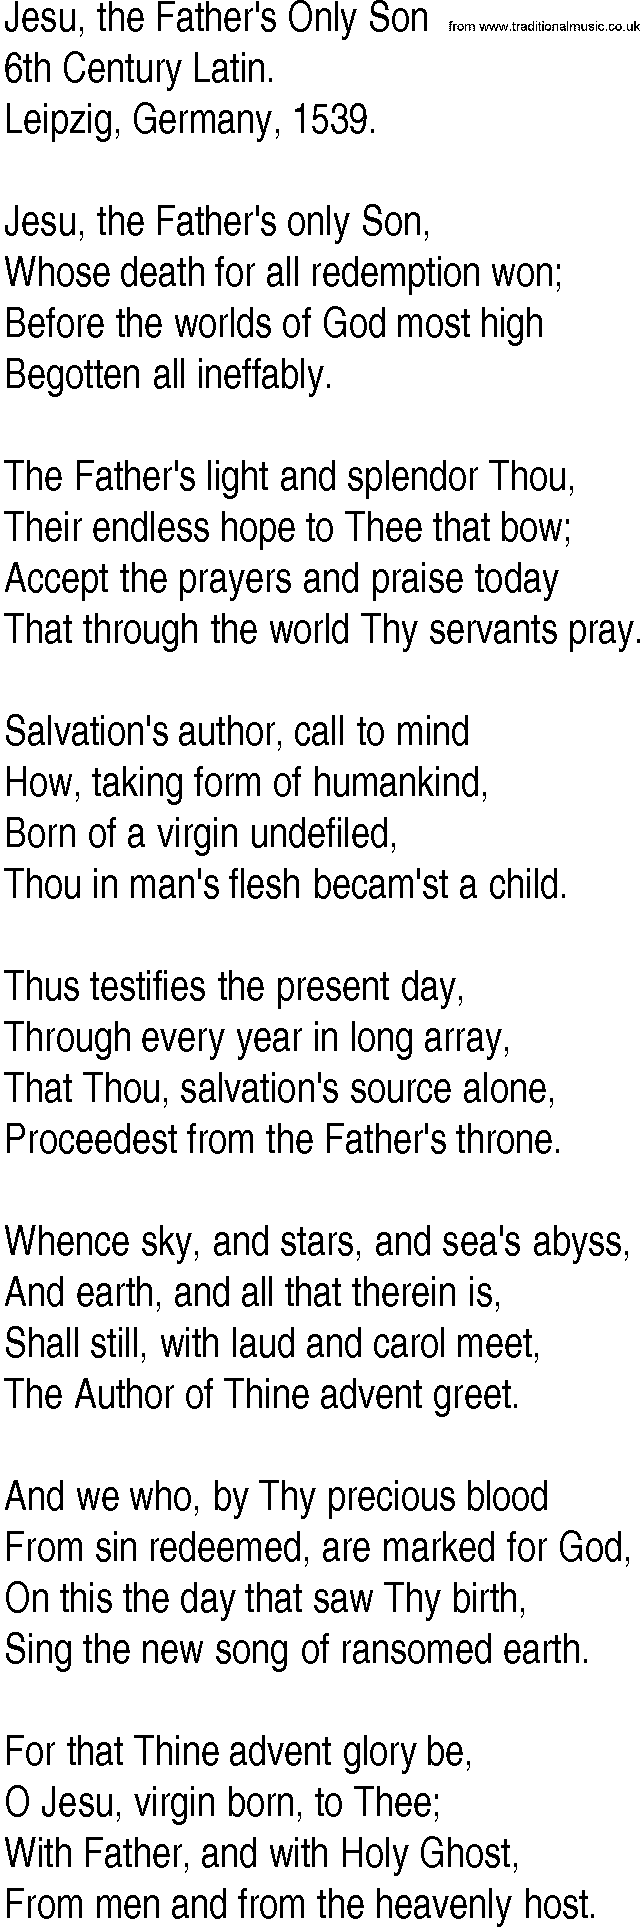 Hymn and Gospel Song: Jesu, the Father's Only Son by th Century Latin lyrics